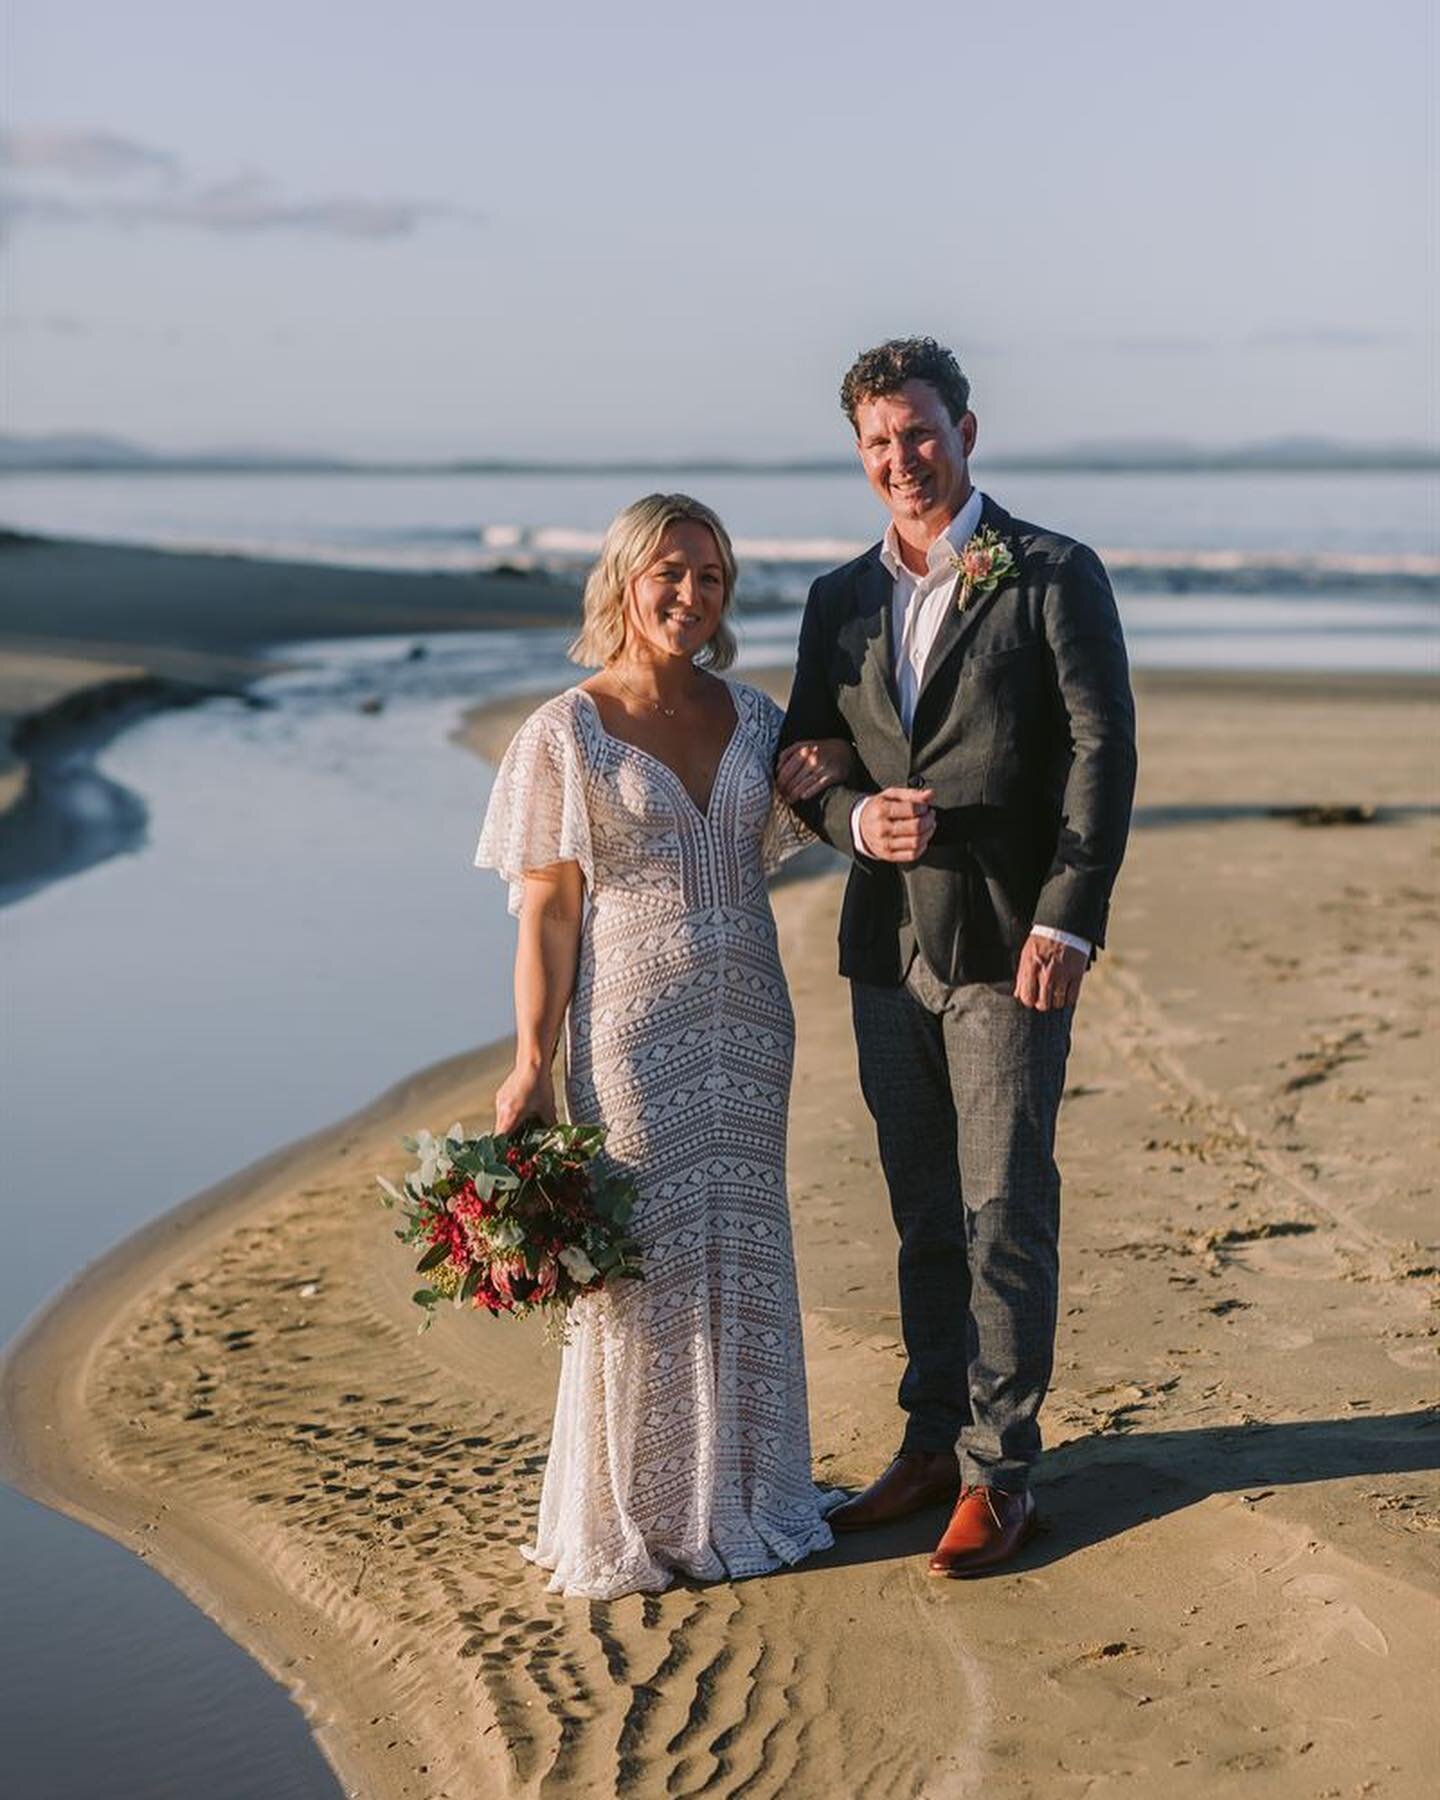 More Ash + Scot // simple, elegant, and surrounded by family. Relaxed + intimate, what more could you want?! 🤍

Photos + hype: @fredandhannah 
Flowers + enthusiasm: Ash&rsquo;s mum
Location + accomodation: @piermont 

#hobartweddingcelebrant #femini